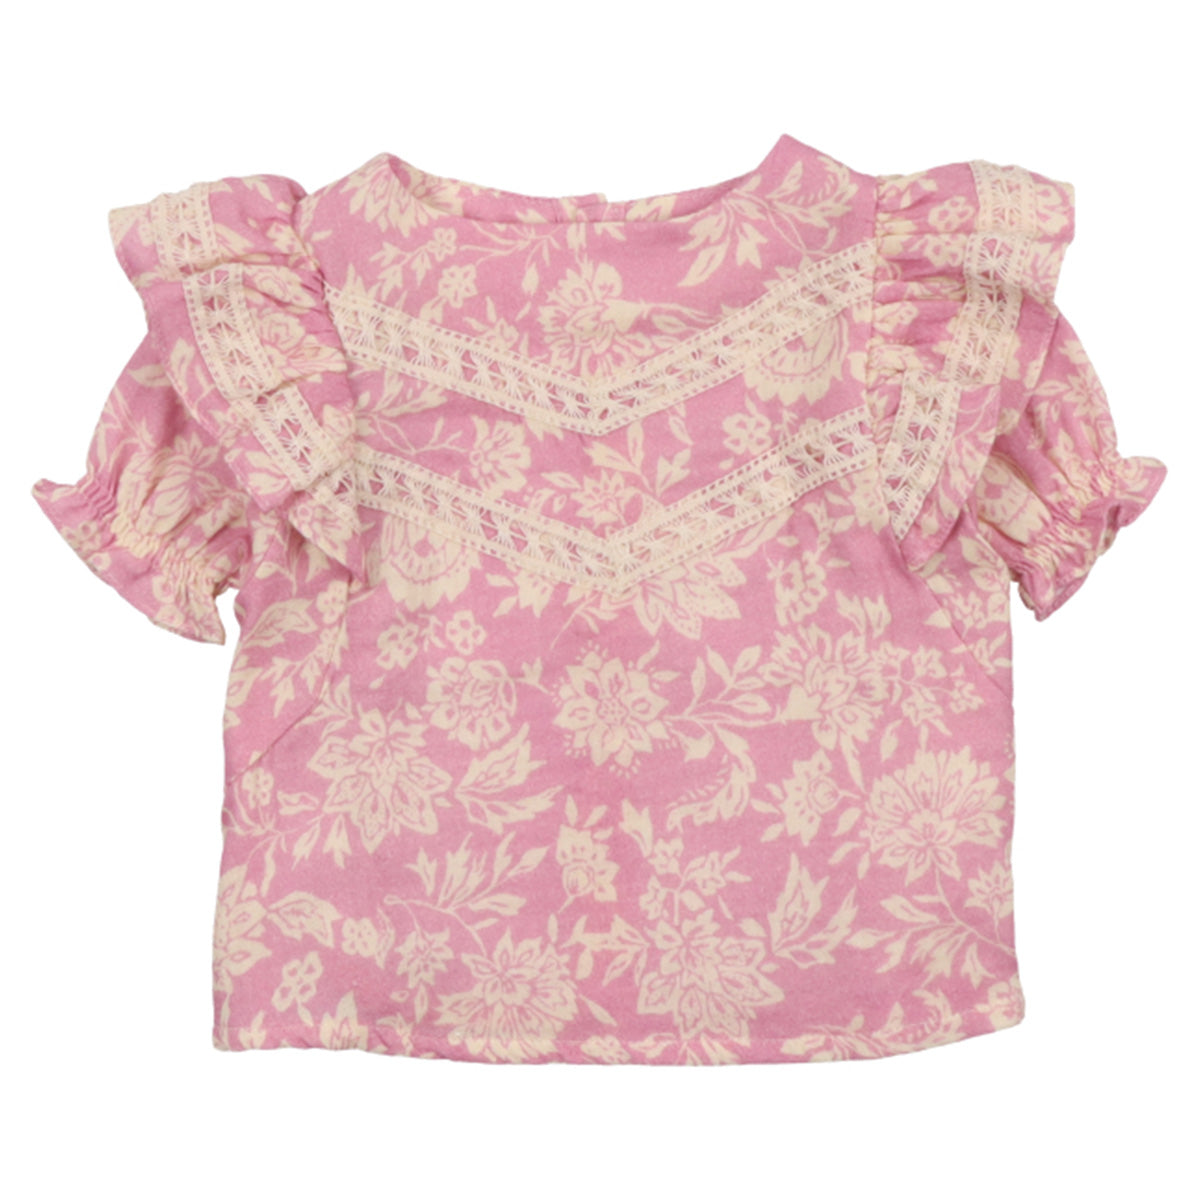 The Santa Clarita Baby Blouse from The New Society. This blouse features a distinctive, one-of-a-kind print